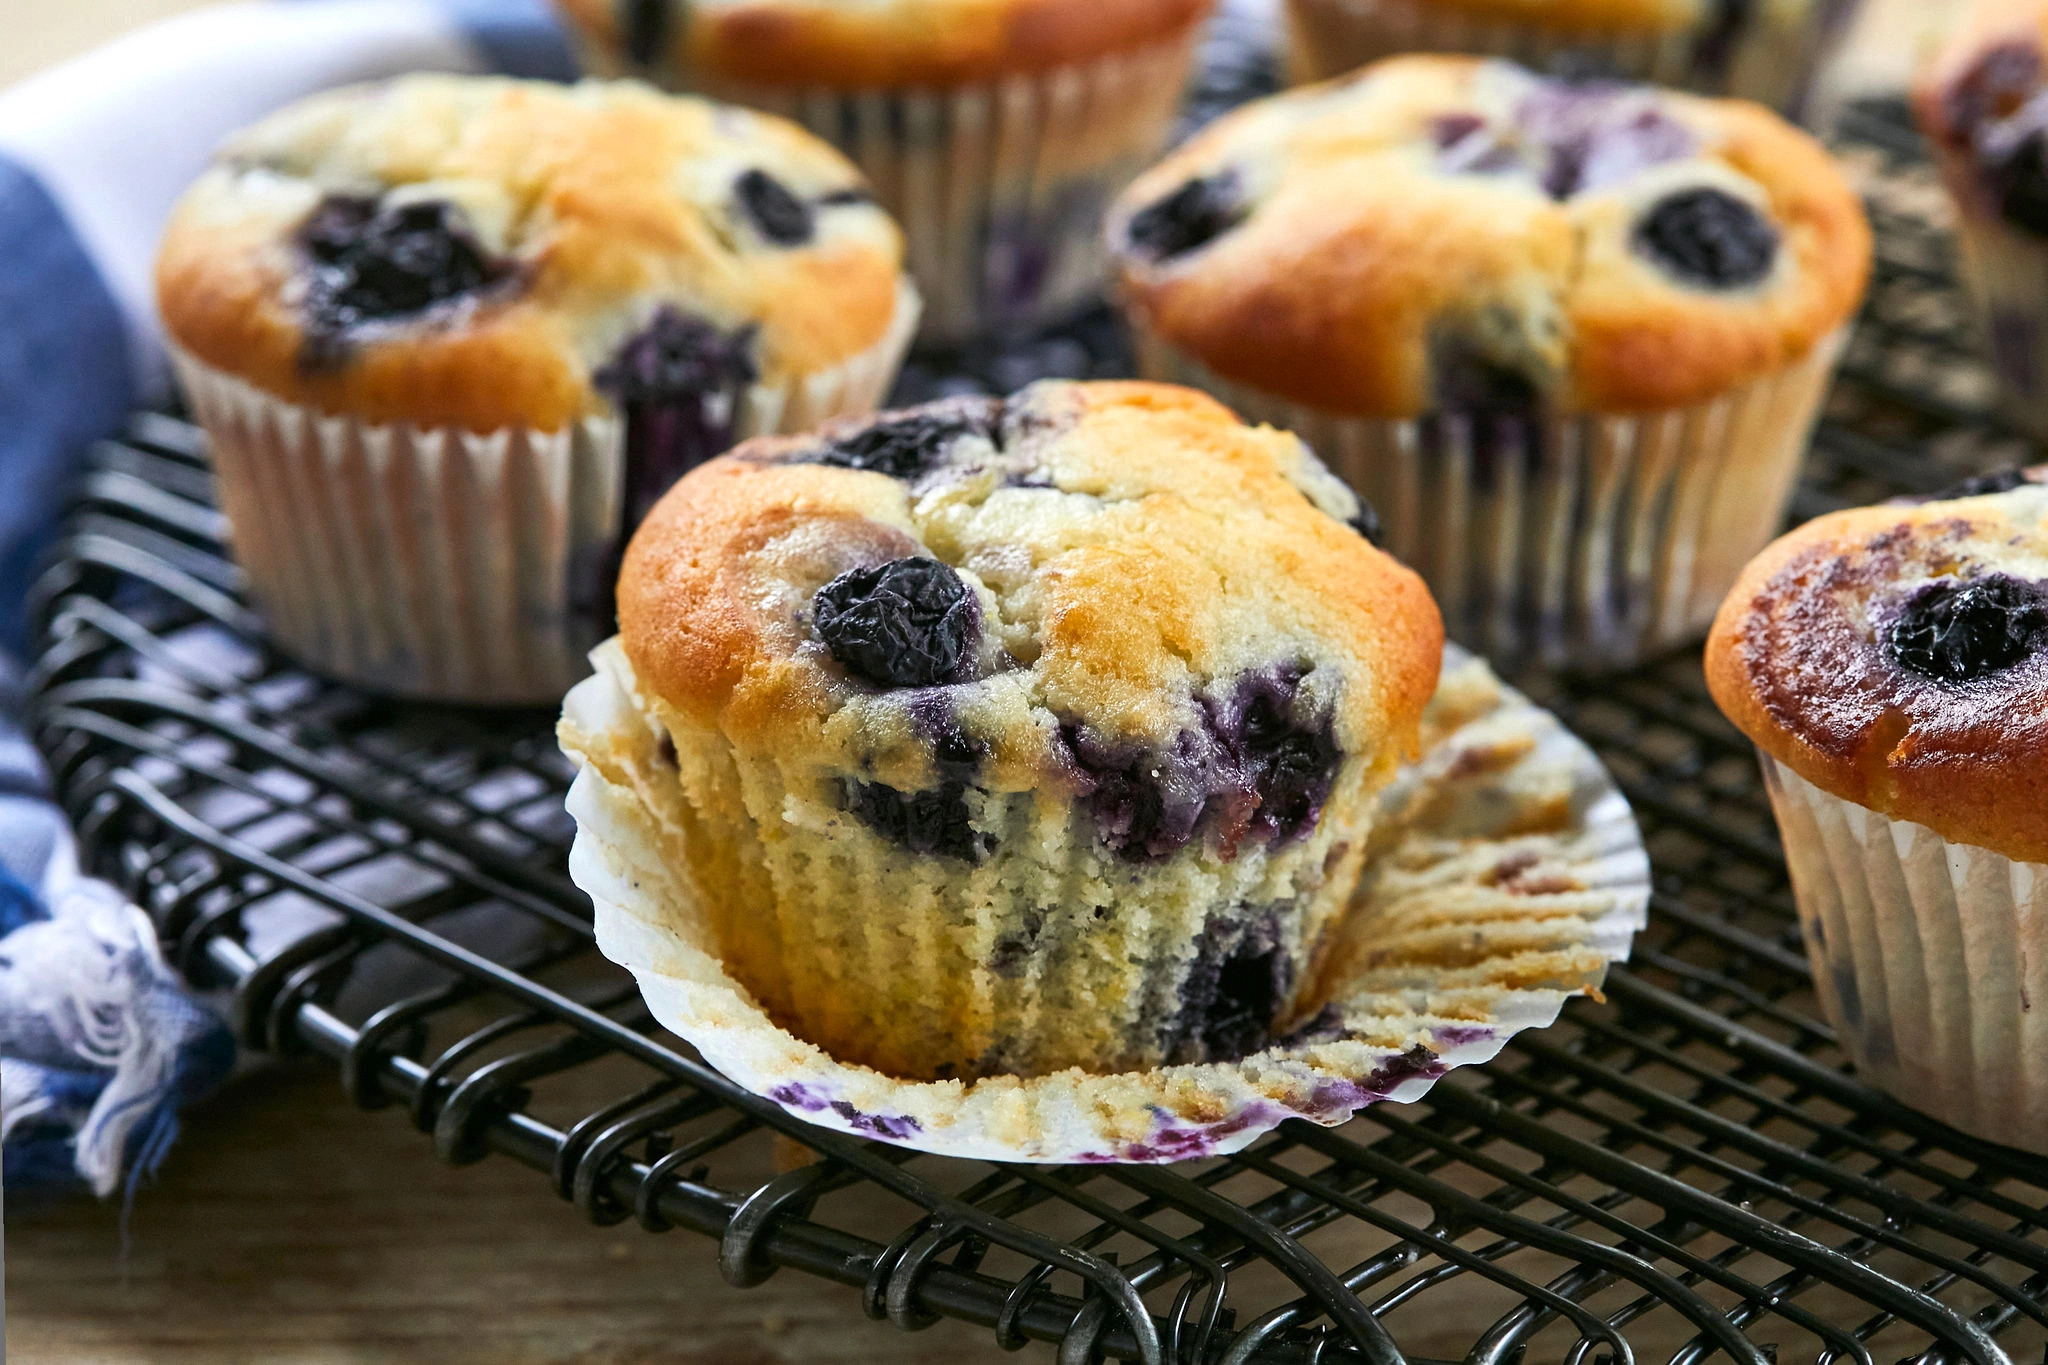 A color photo of several blueberry muffins in paper wrappers.